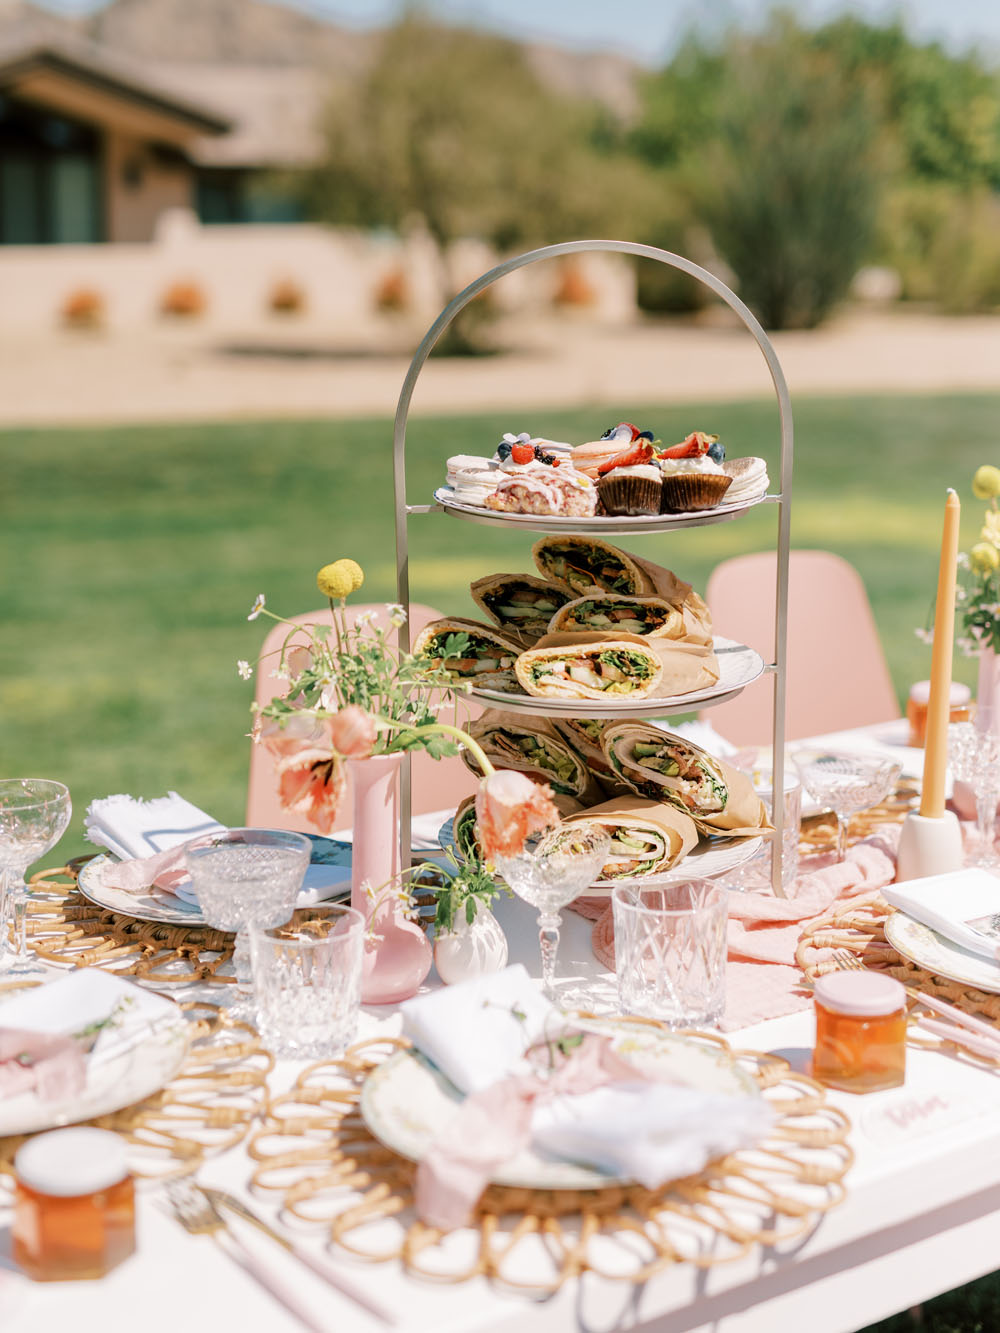 English tea party inspired bridal shower